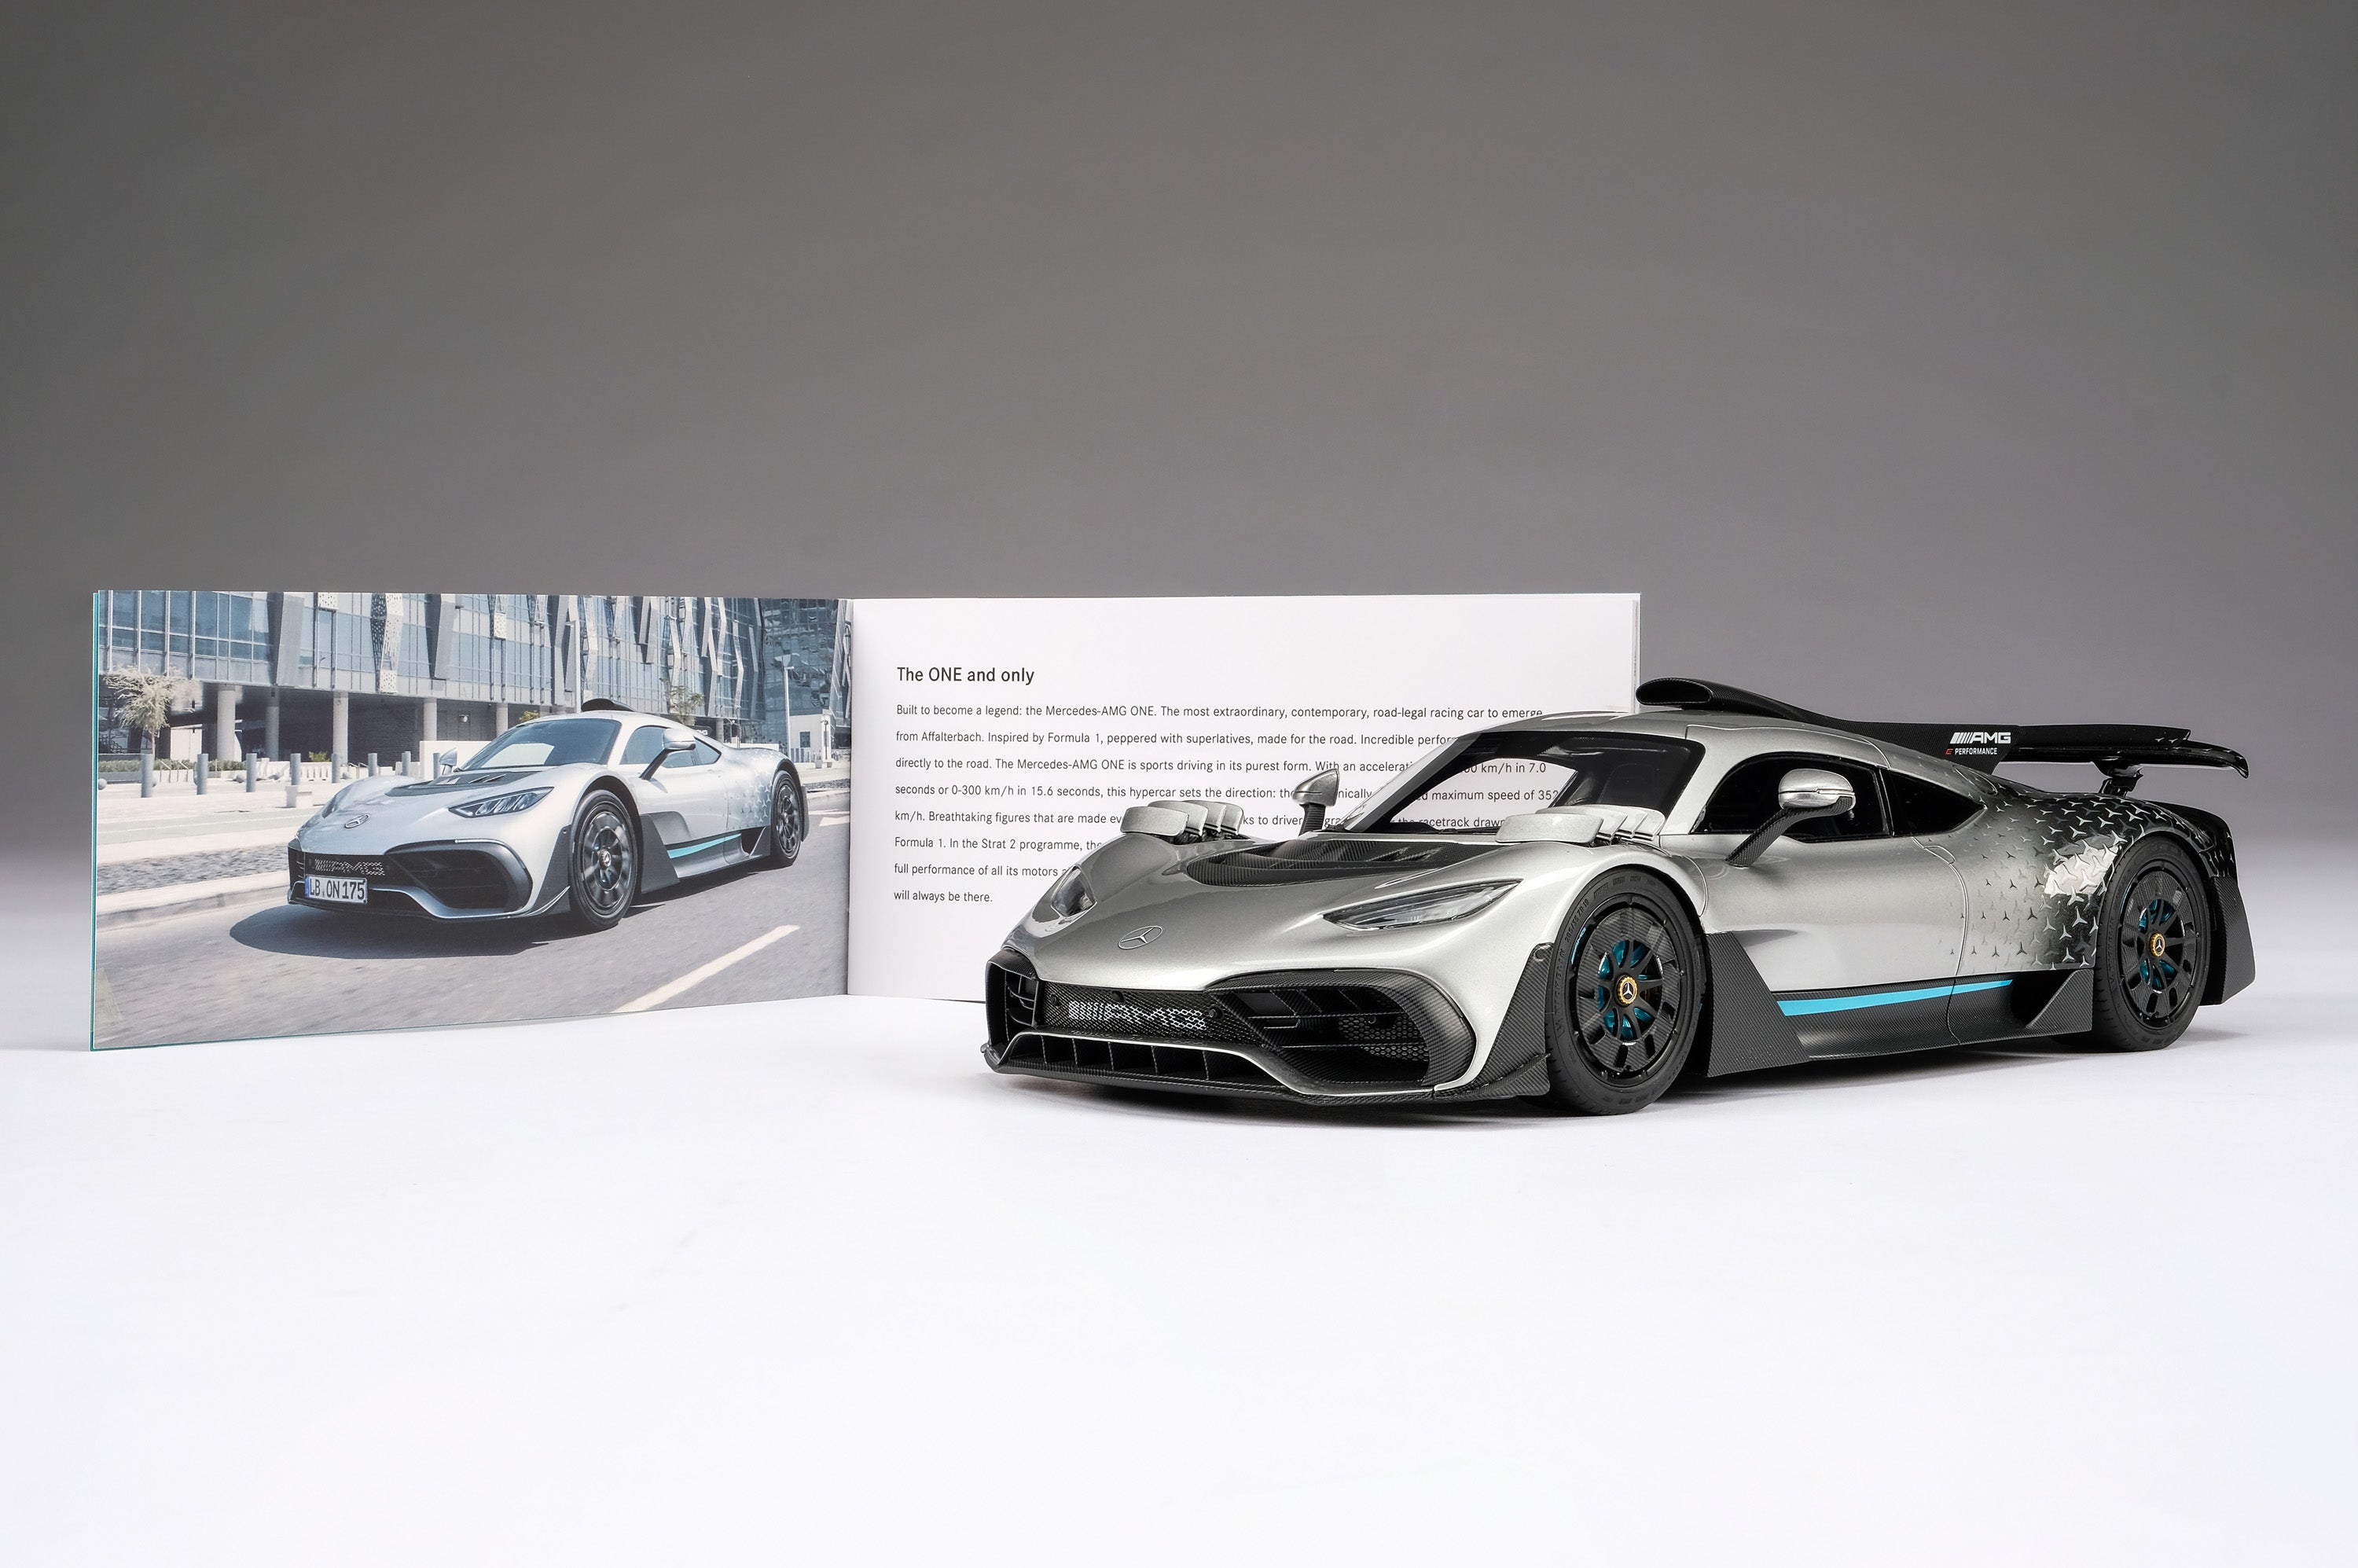 Voiture Miniature Mercedes AMG One 1/18 - ONES IVY MODEL